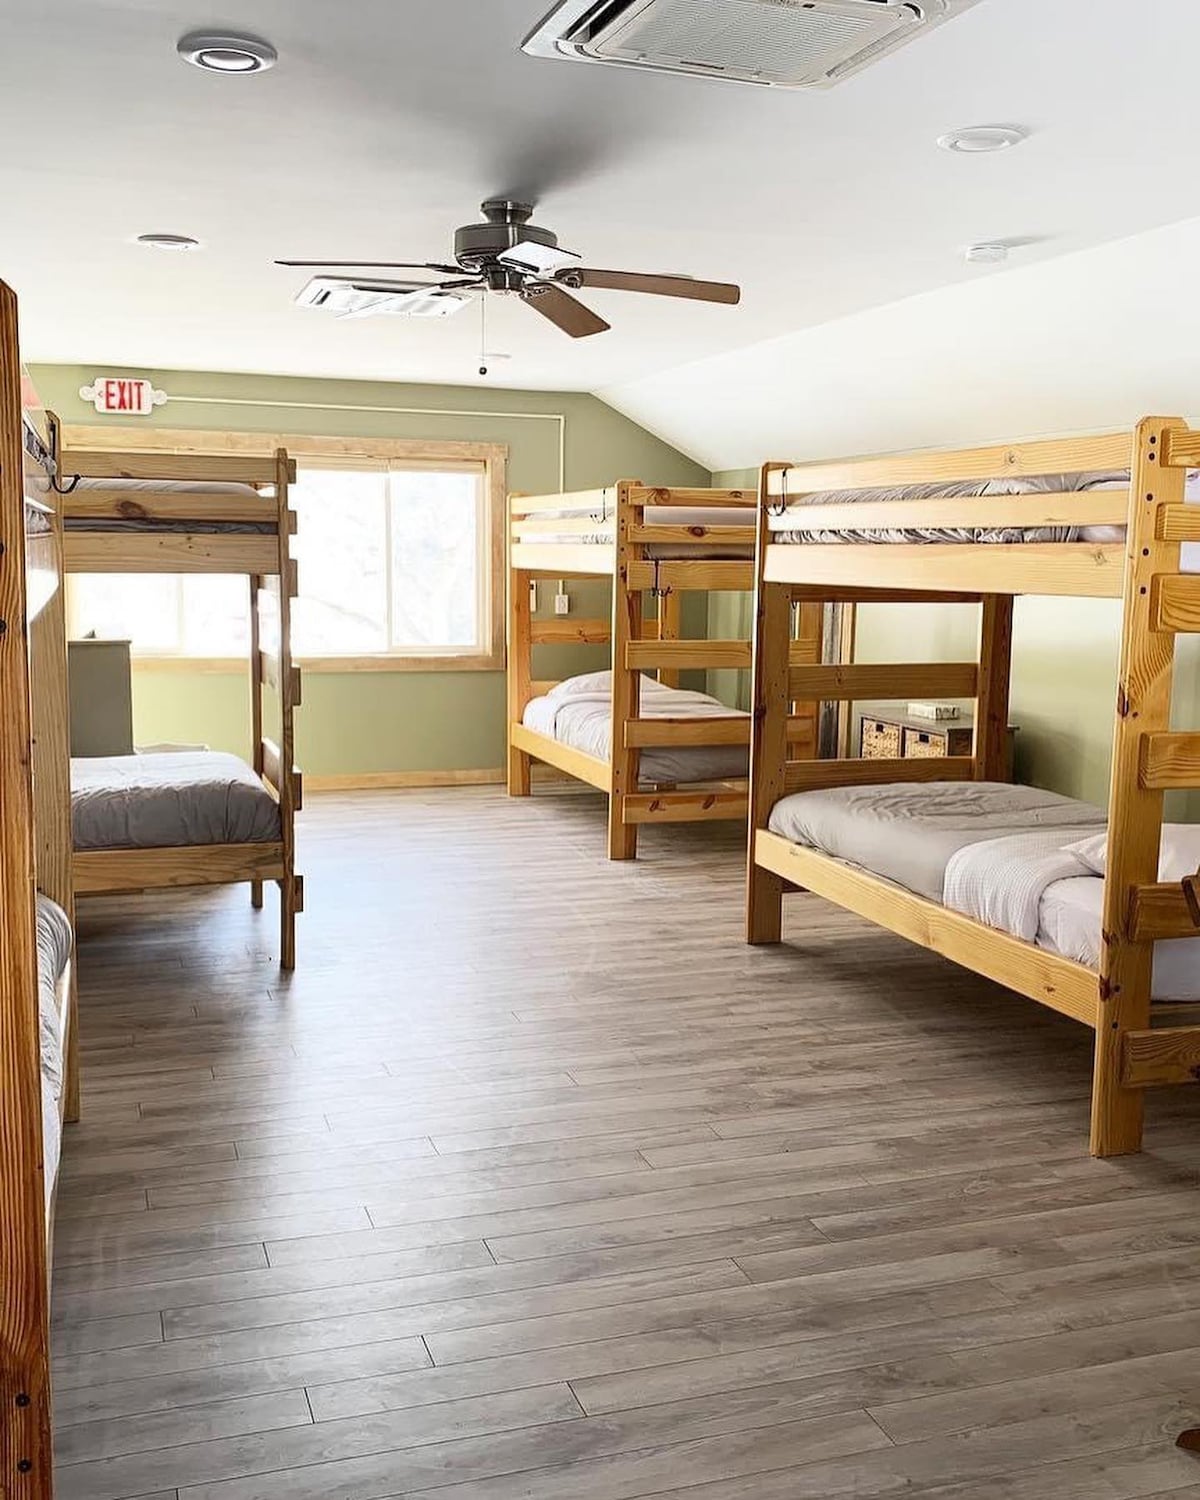 A Bunk at Wise Pines